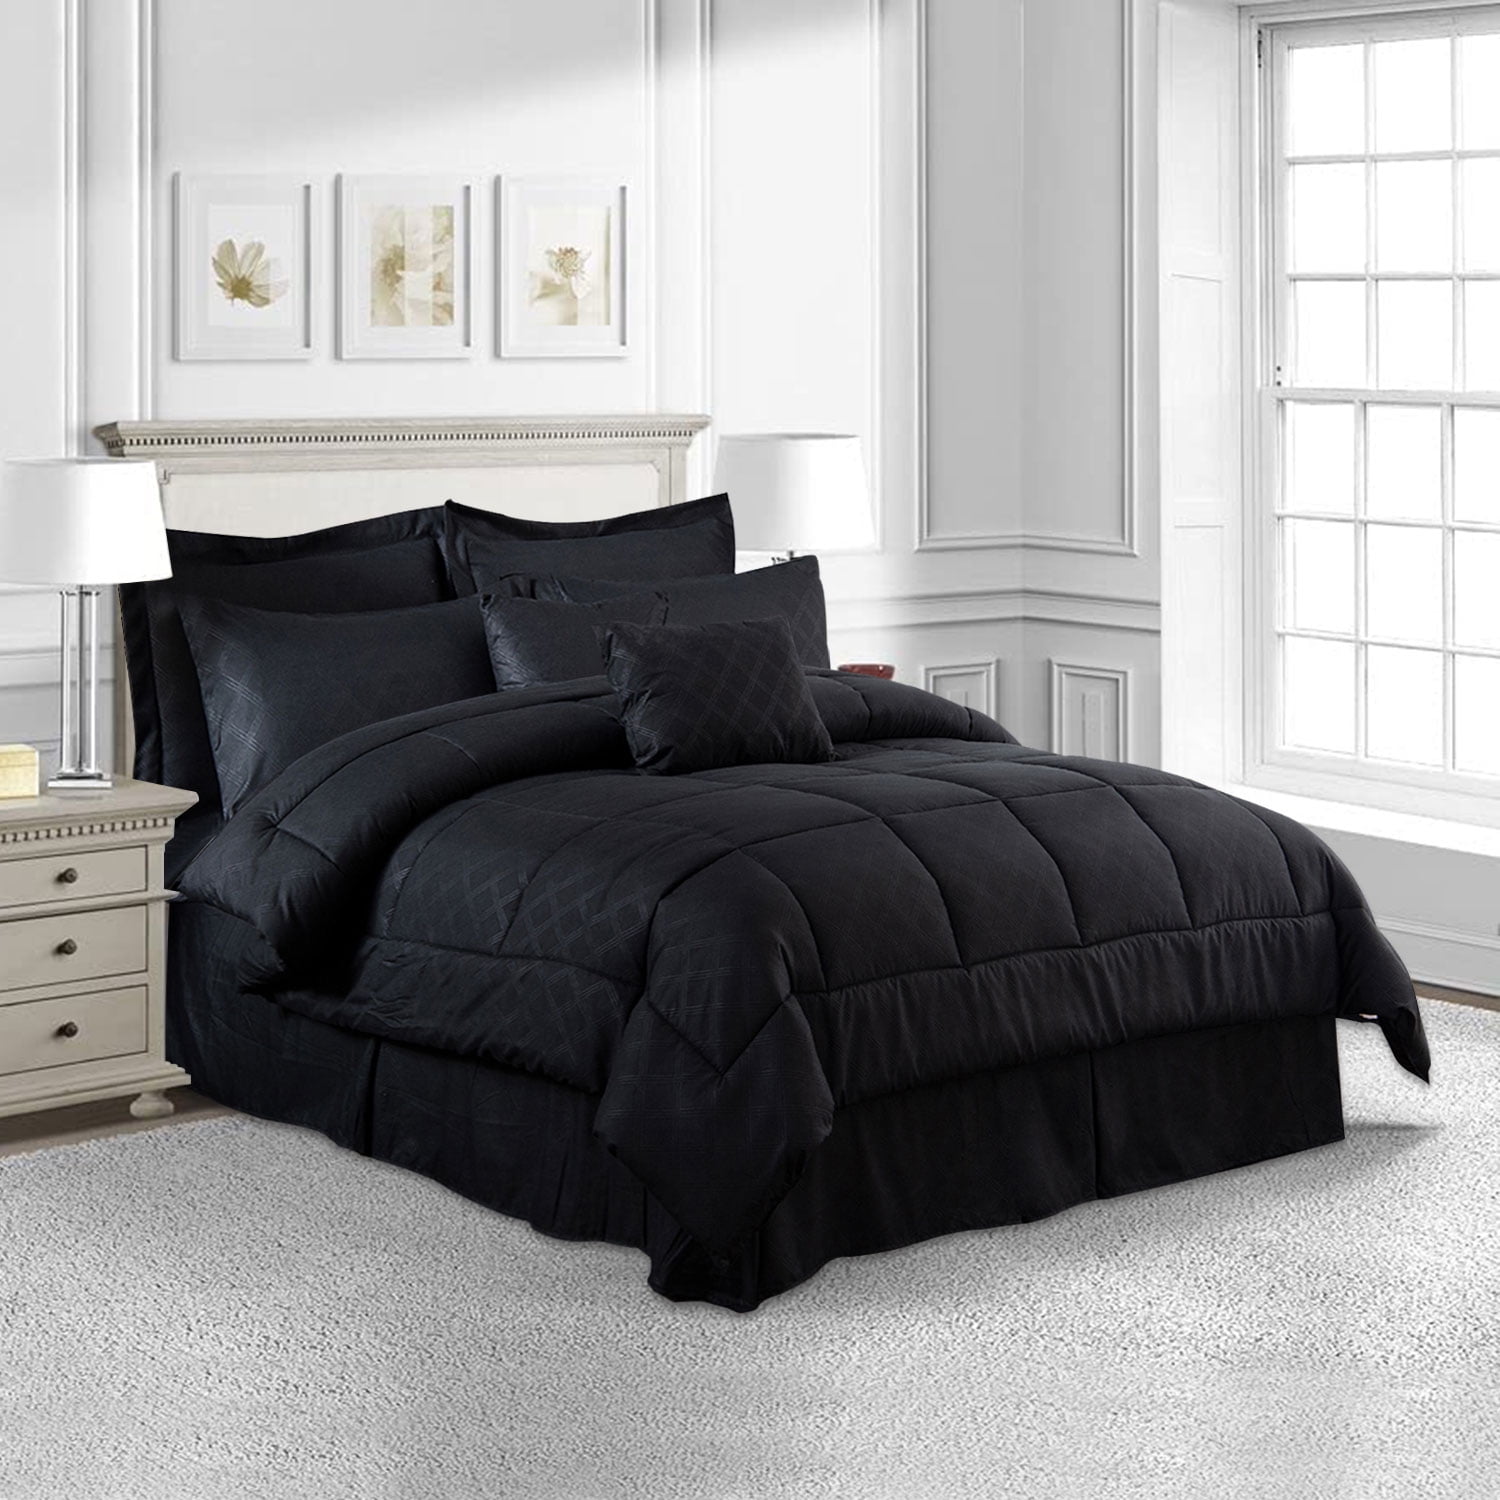 Plush Luxury Sol Details about   MERRY HOME 10 Piece Comforter Set Bed-in-A-Bag with Sheet Set 